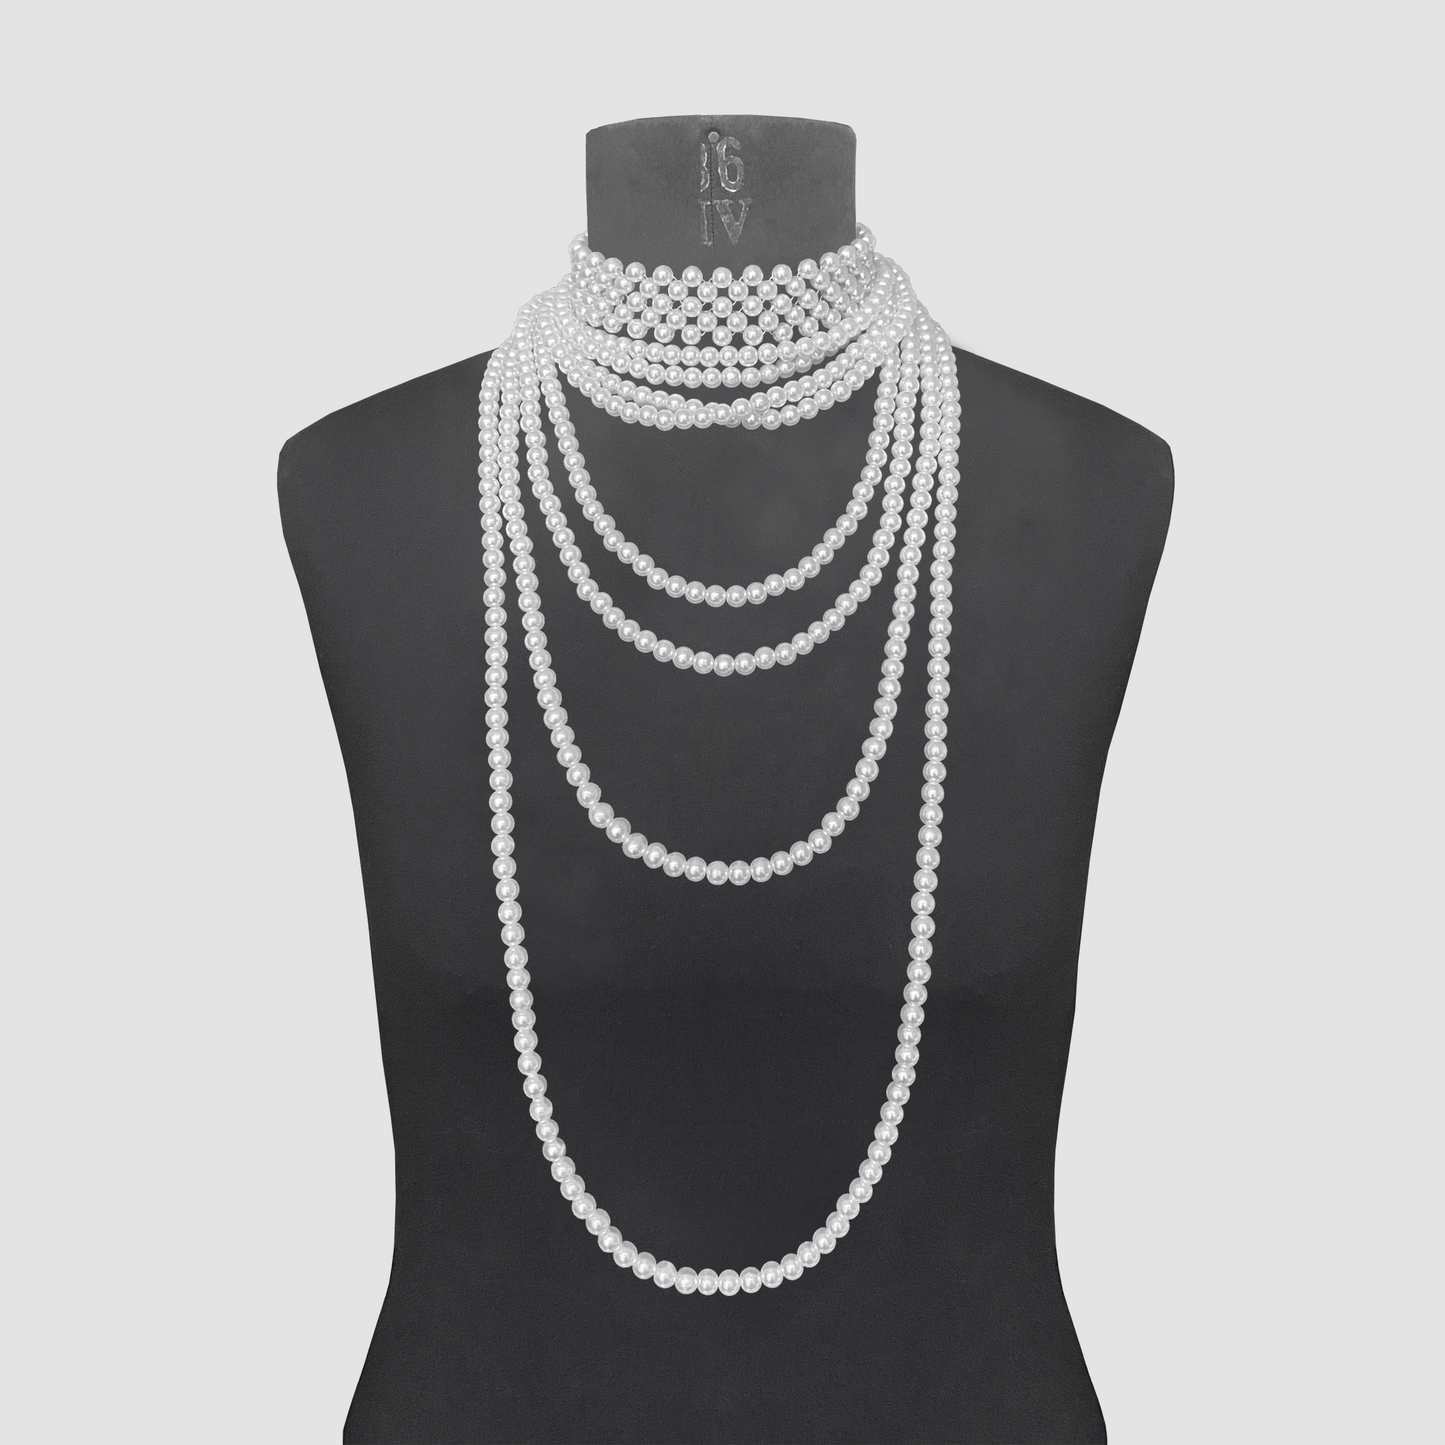 PEARL GODDESS NECKLACE